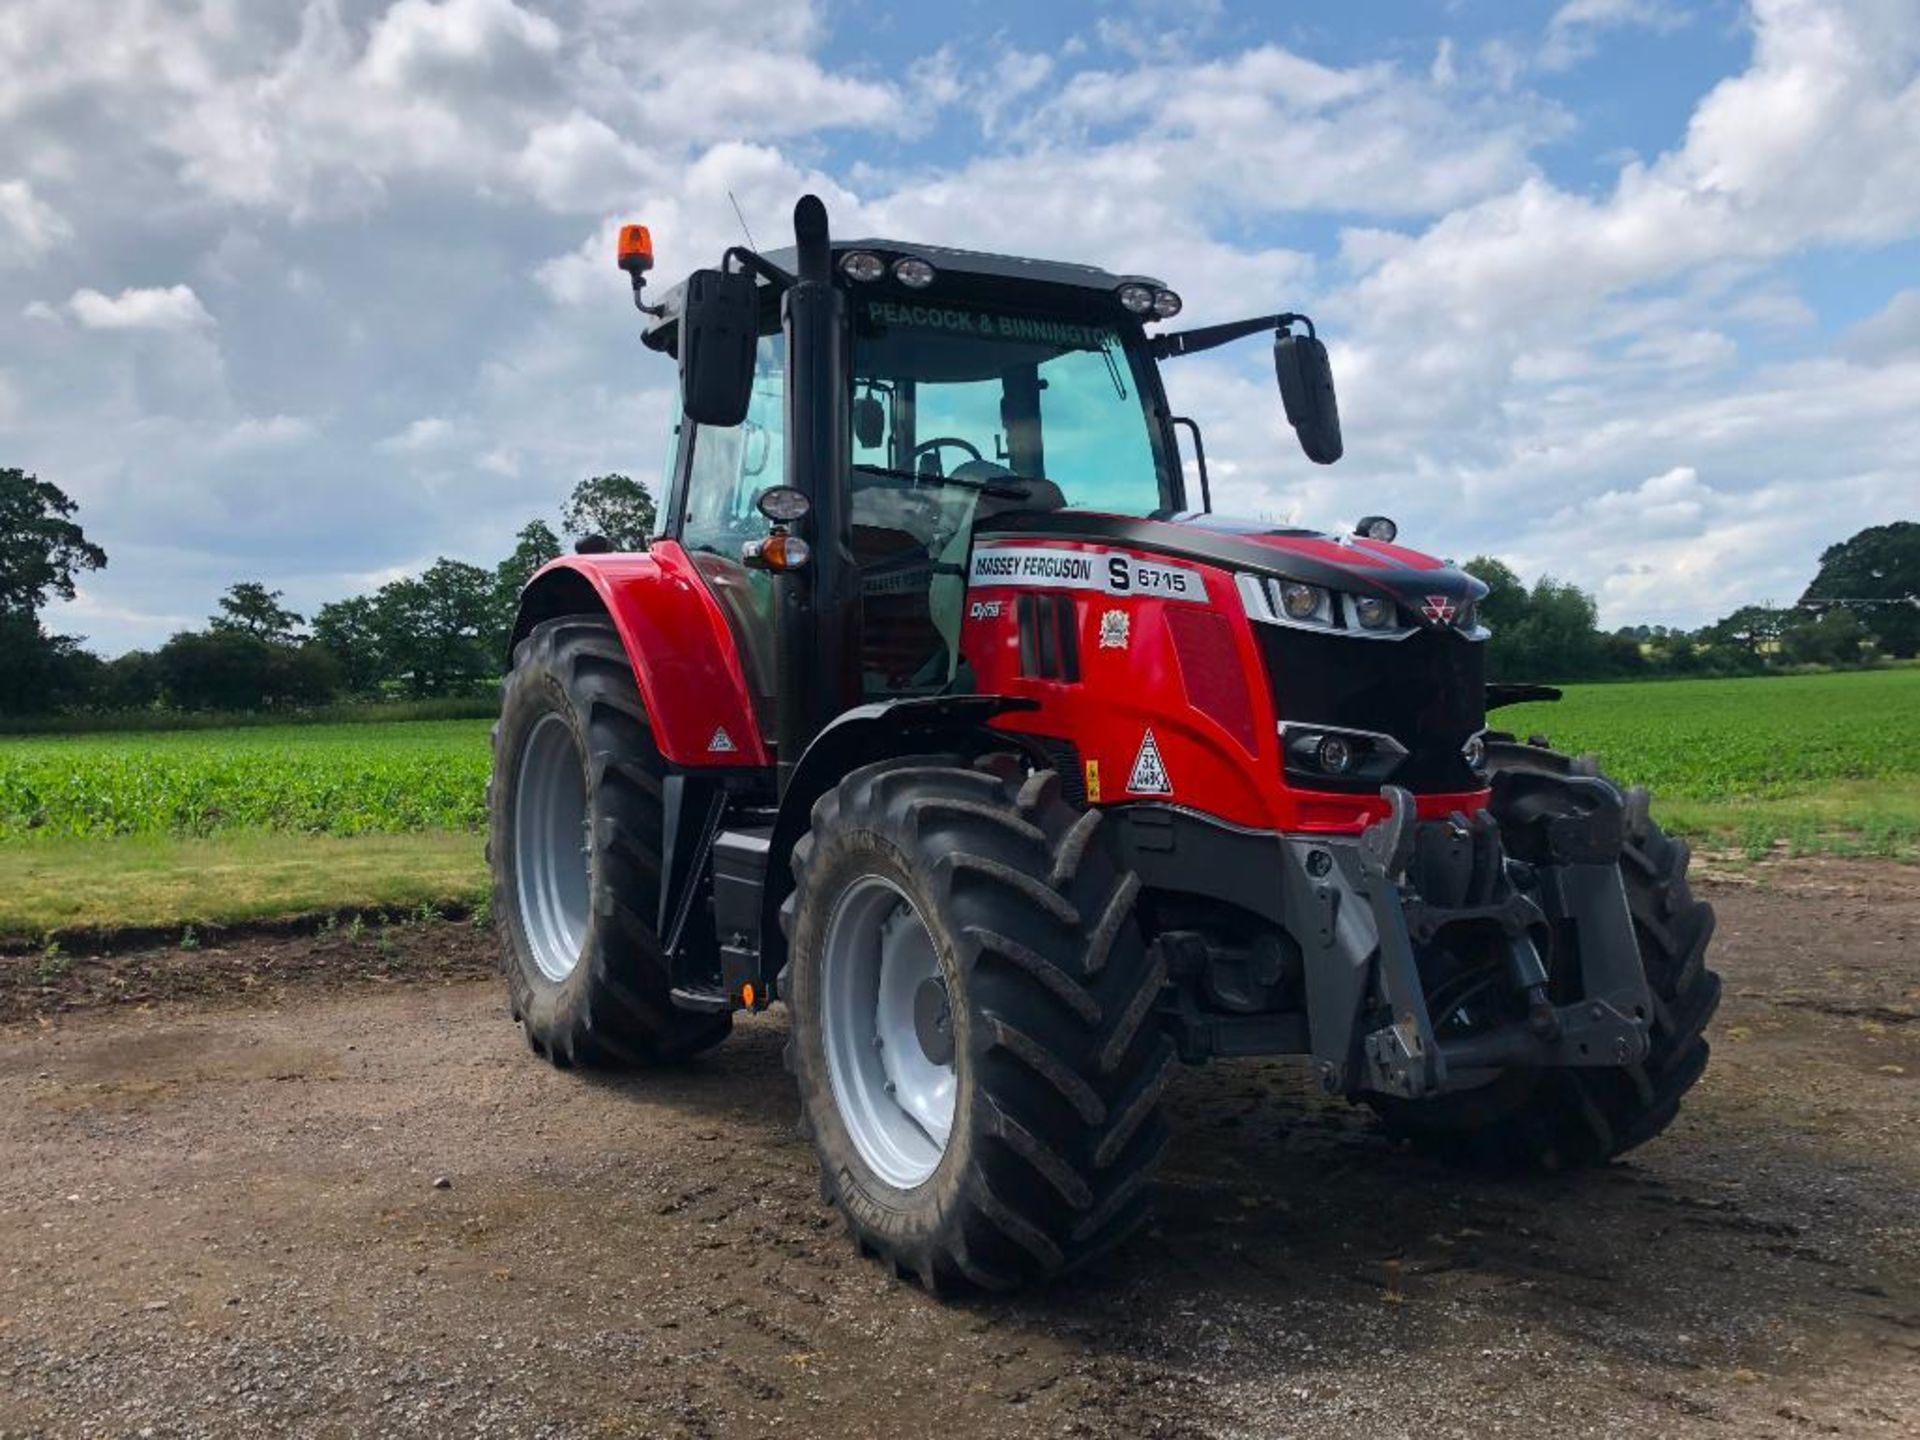 2019 Massey Ferguson 6715 S Dyna 6 50kph 4wd tractor c/w 3 manual spools, front linkage, air brakes, - Image 36 of 41